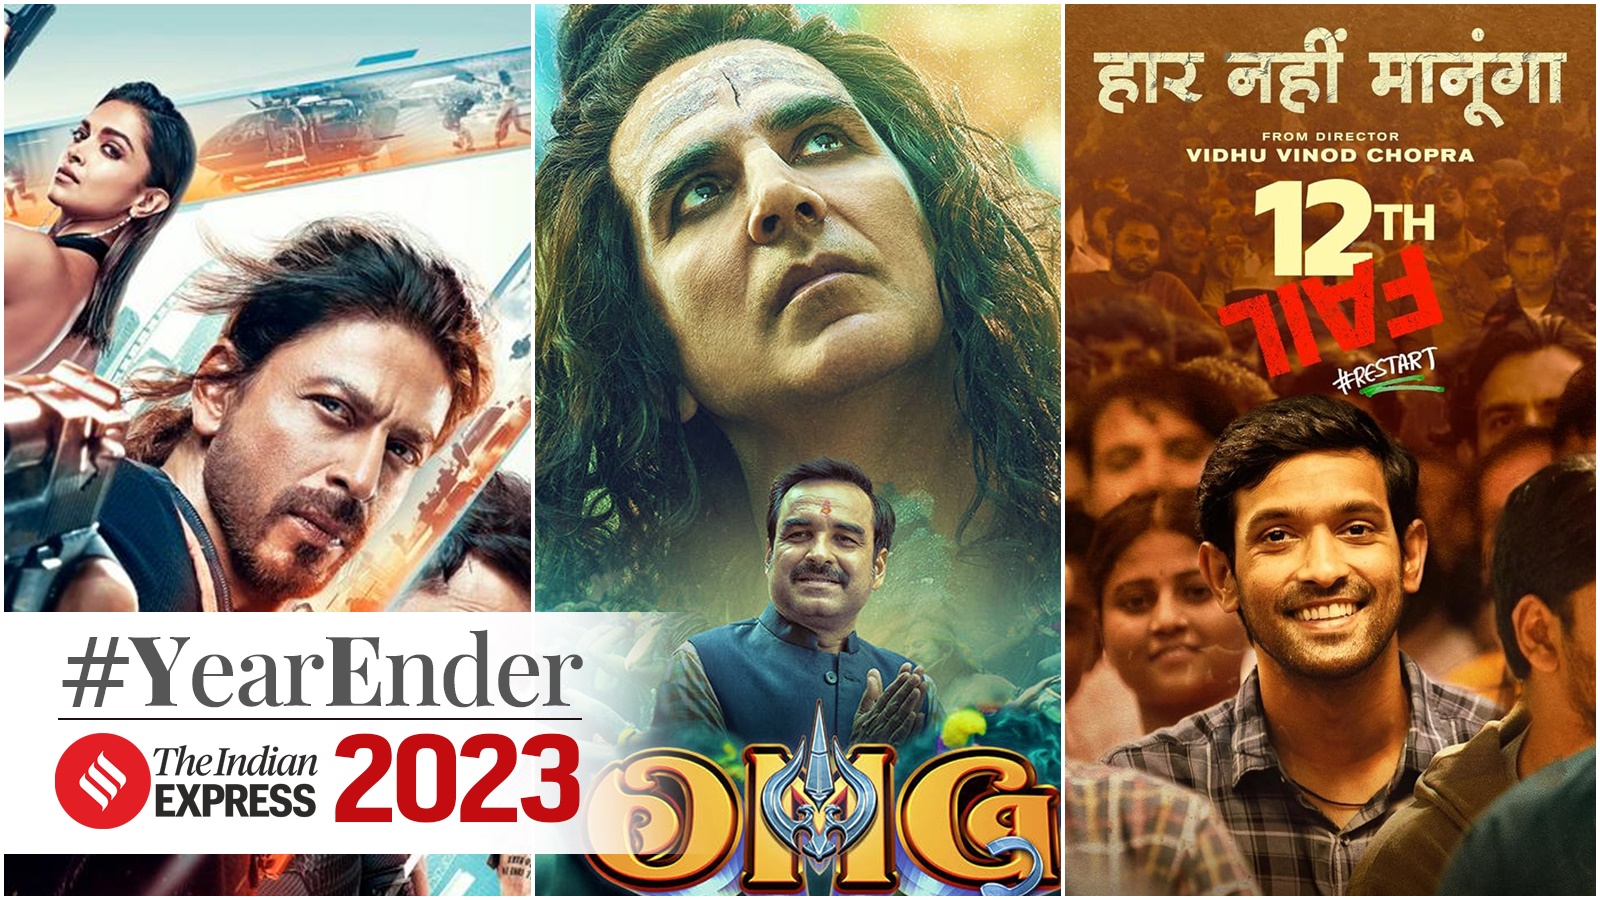 The Best Films of 2023: Shah Rukh's Jawan and Pathaan, OMG 2 and 12th Fail  feature in Shubhra Gupta's list | Bollywood News - The Indian Express